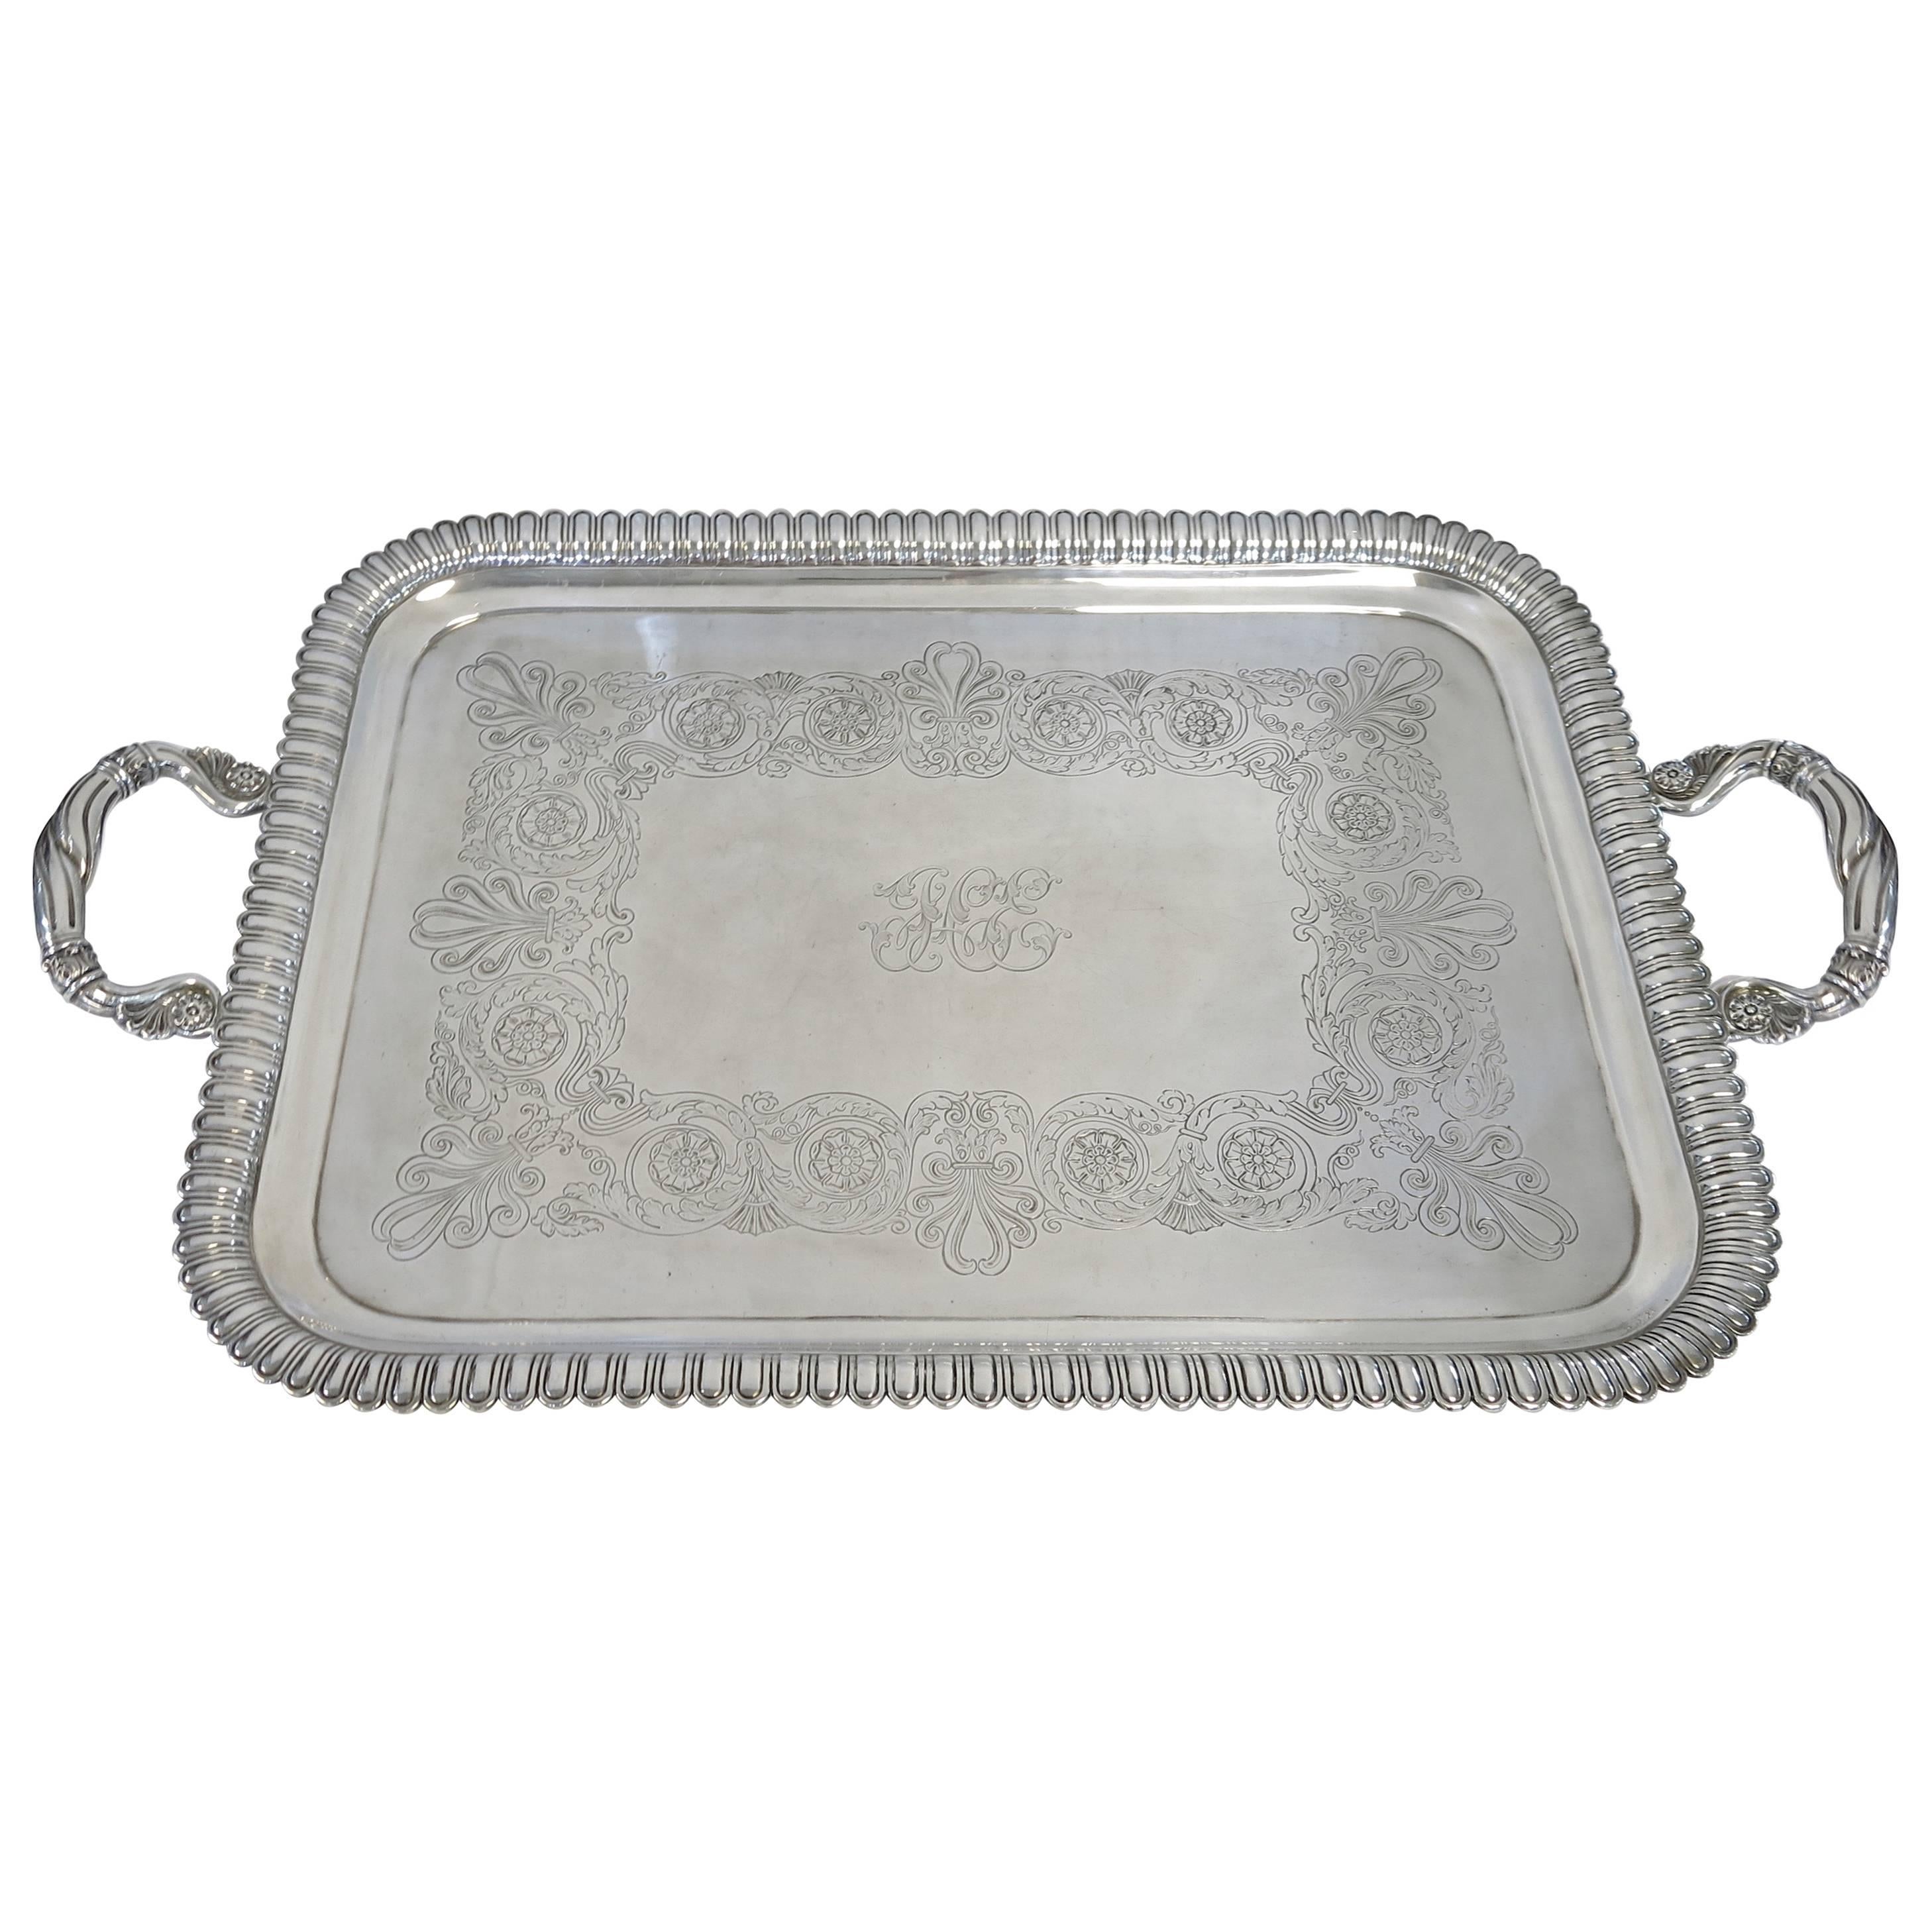 Very Large, Art Nouveau Style, Sterling Silver Tray, English